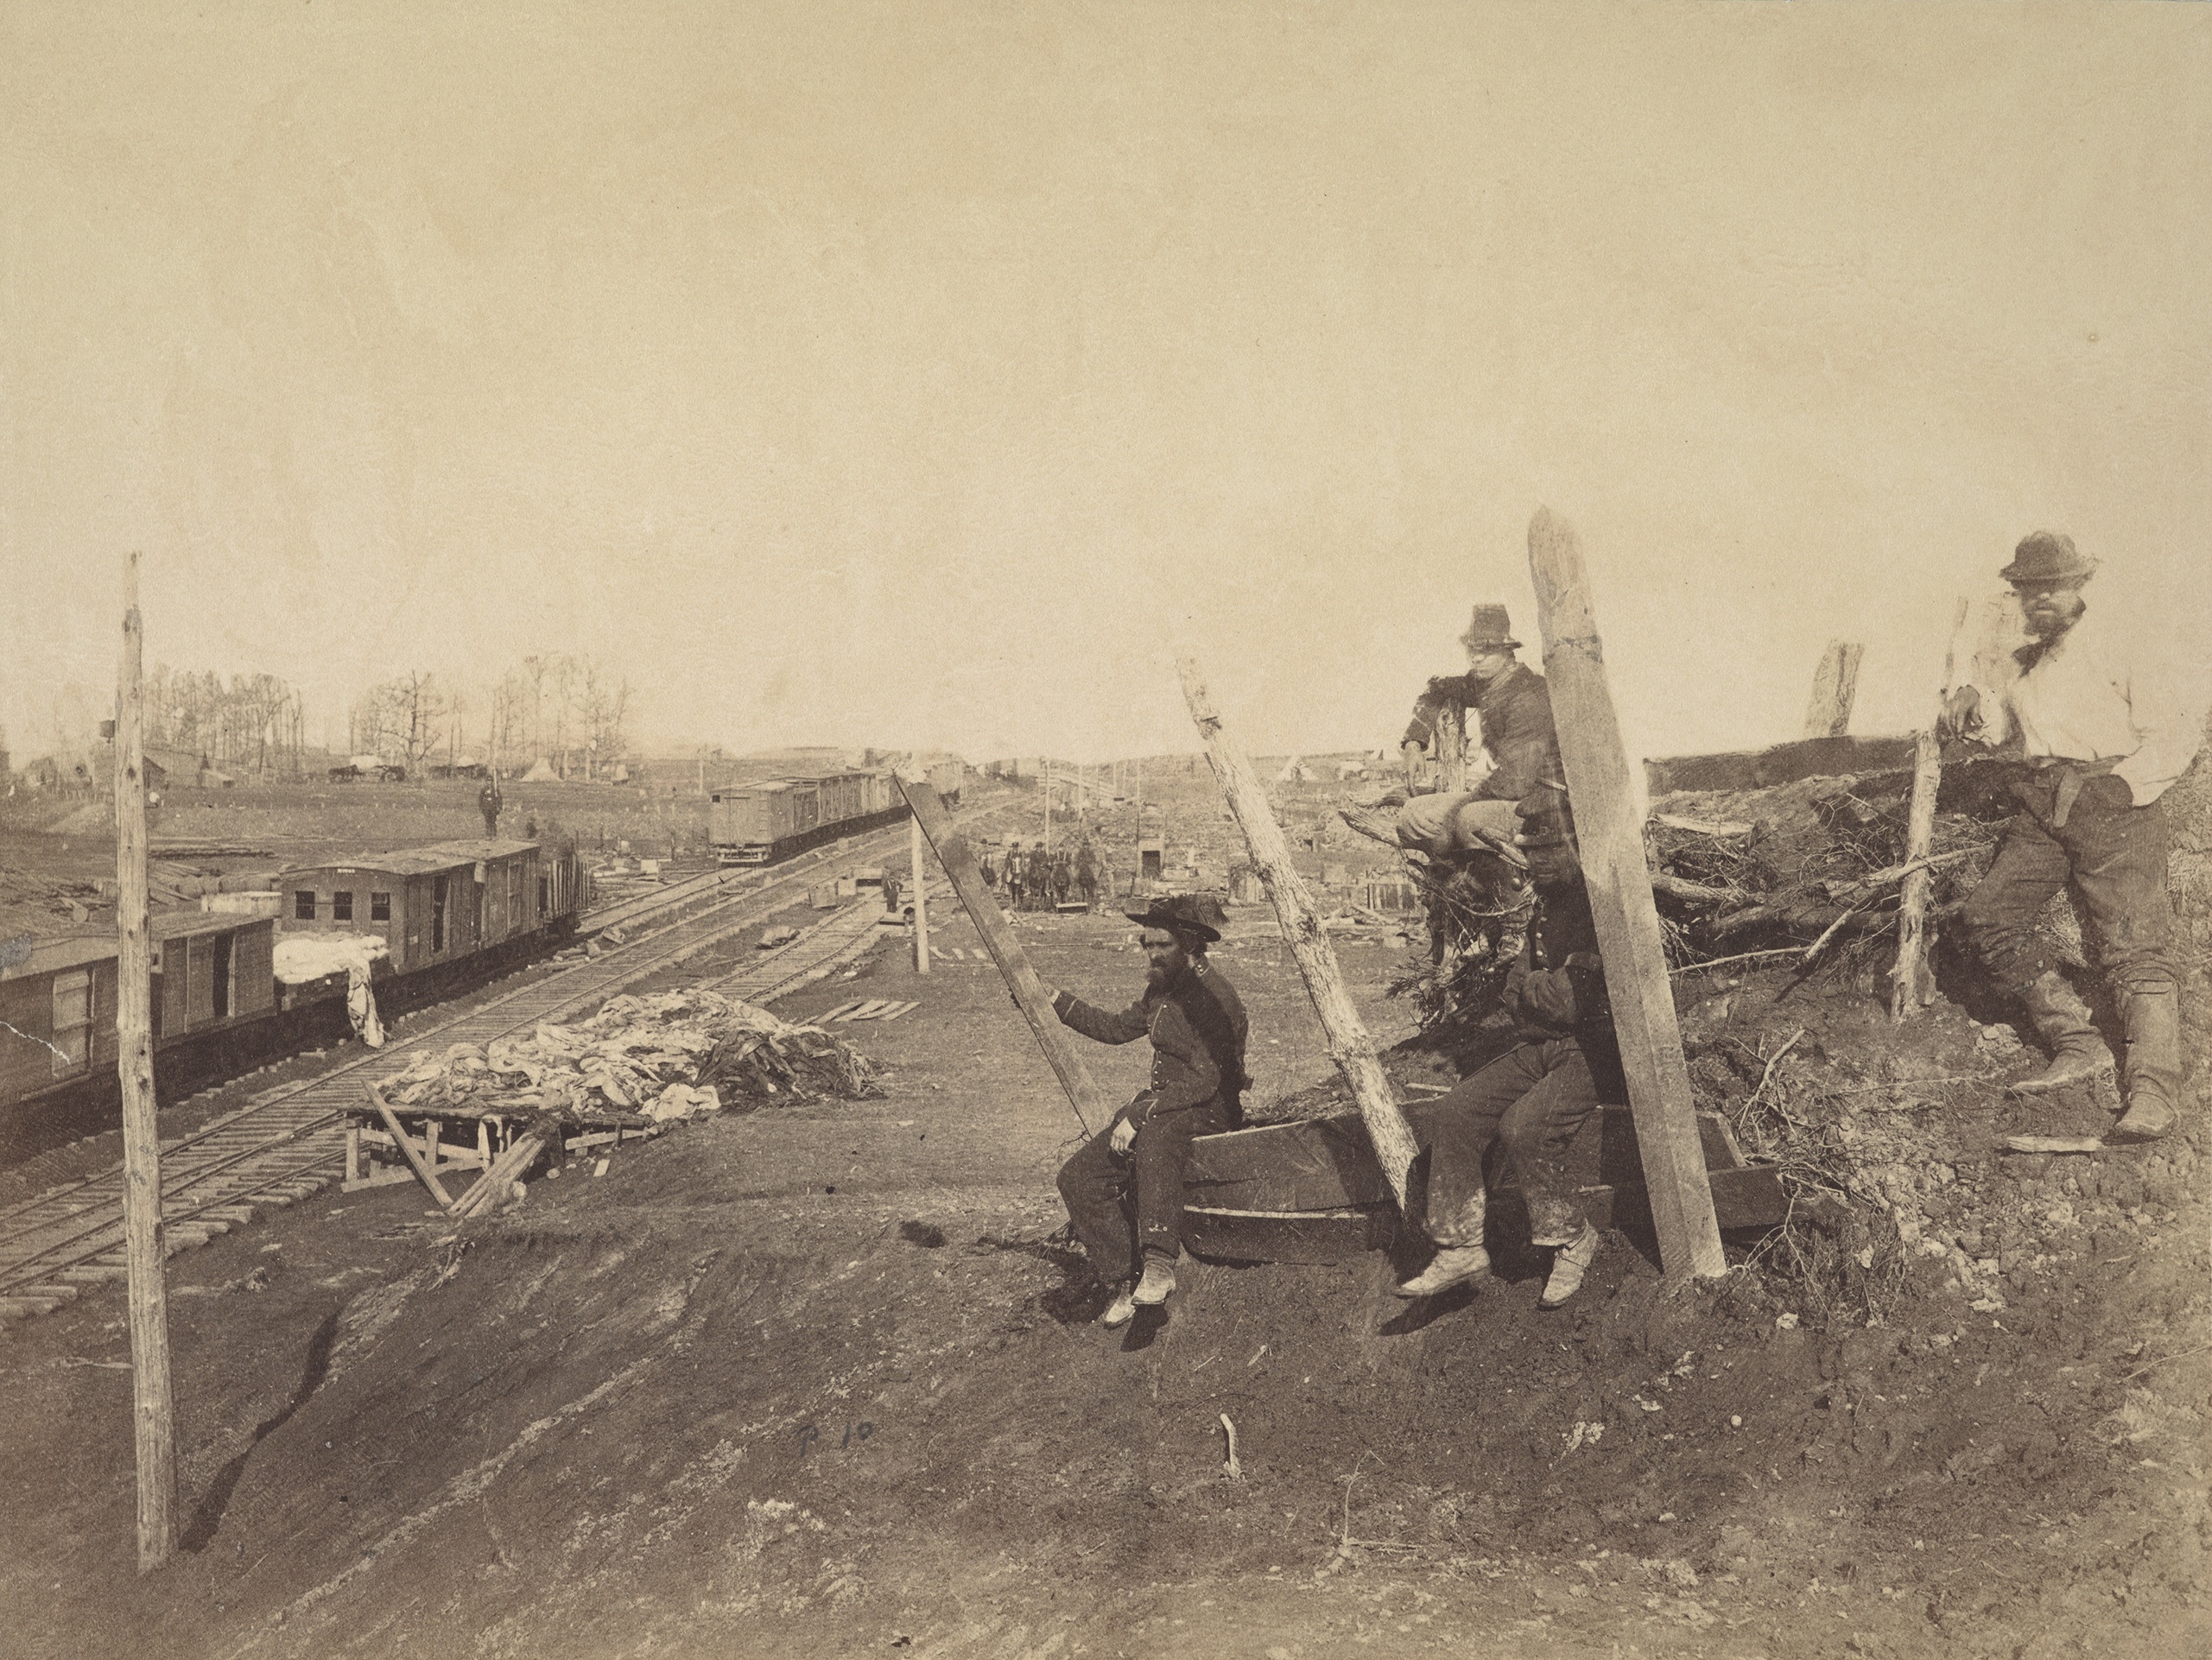 Wartime Manassas Junction, Va.: When Confederate soldiers captured this critical Union supply depot on the Orange & Alexandria Railroad in August 1862, toothbrushes reportedly were “prized booty.” (Library of Congress)